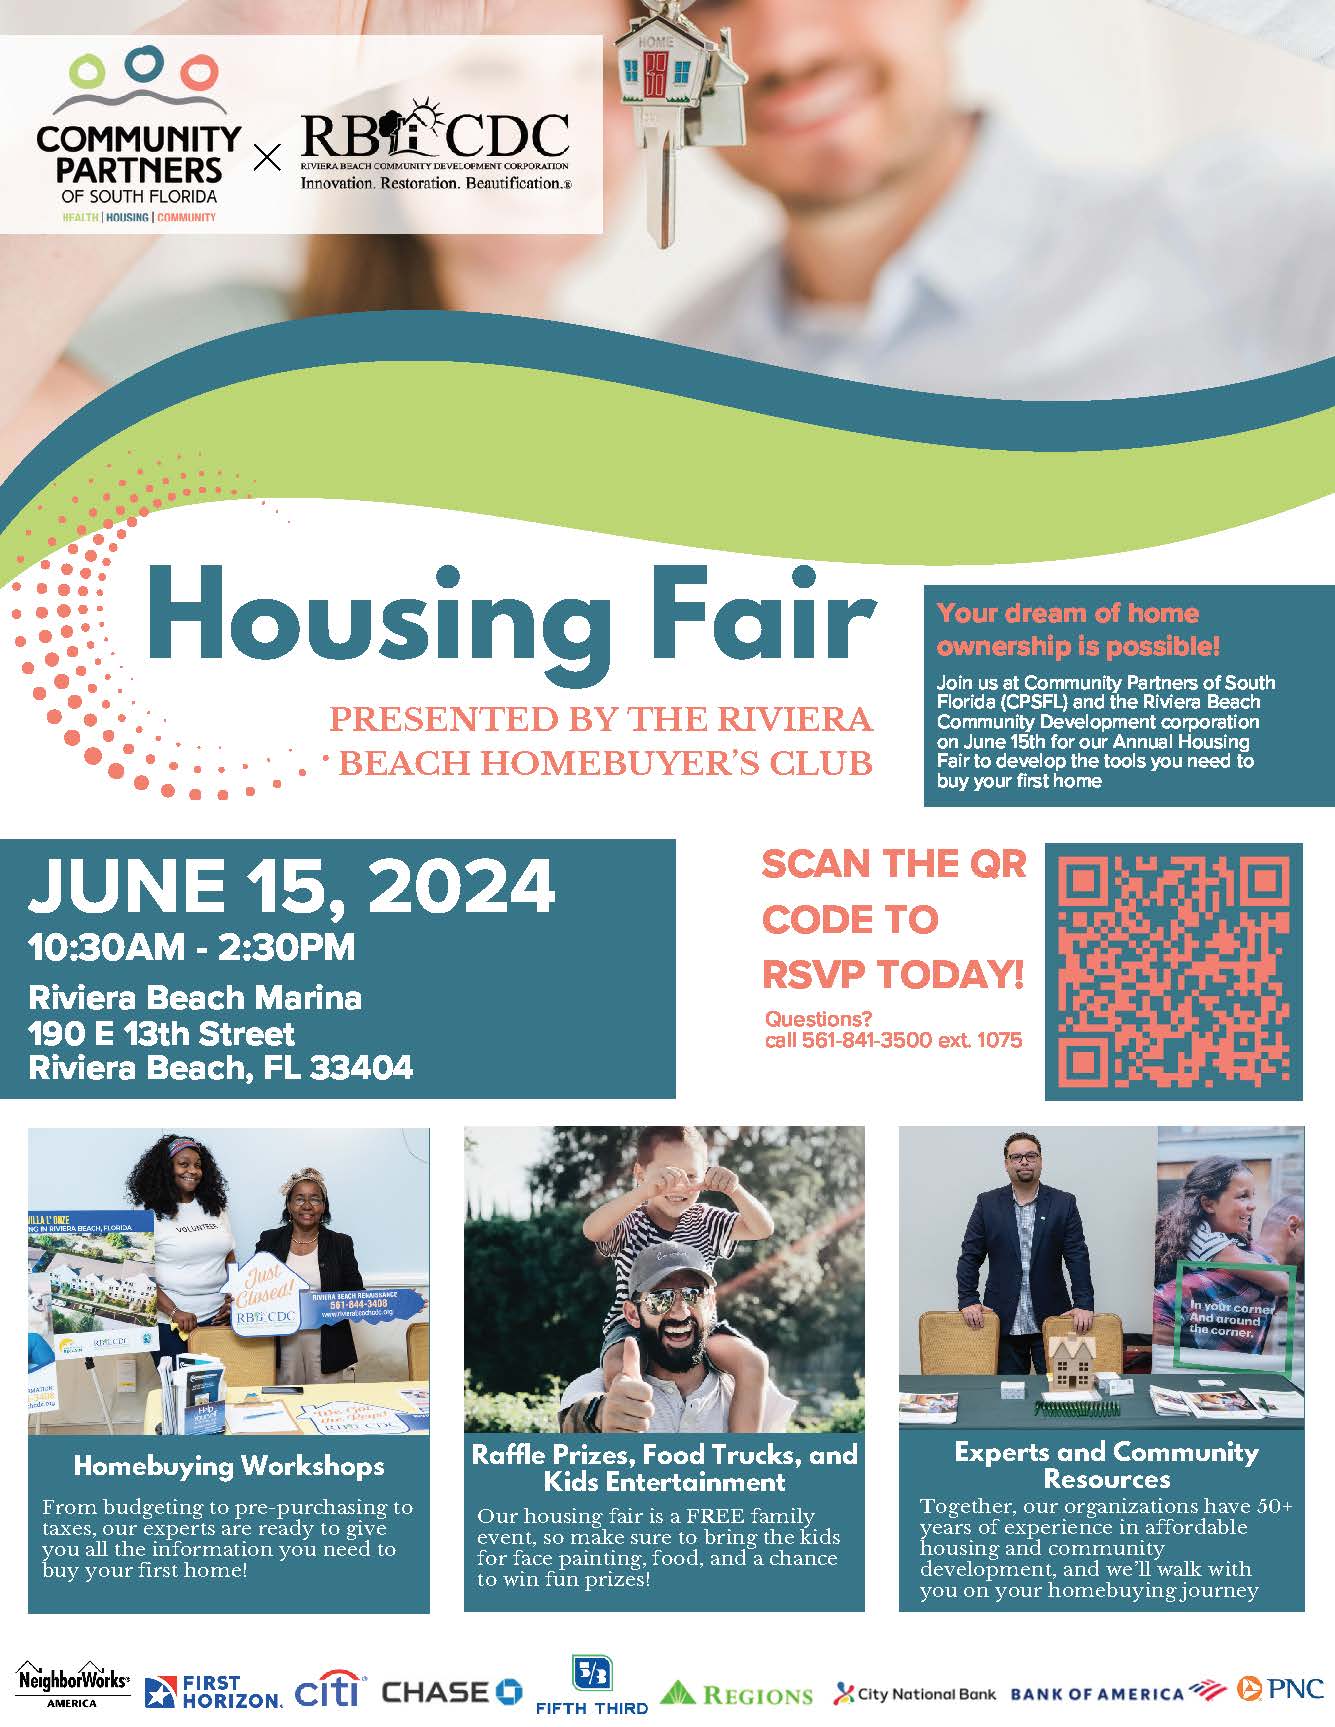 Housing Fair PRESENTED BY THE RIVIERA • BEACH HOMEBUYER'S CLUB Your dream of home ownership is possible! Join us at Community Partners of South Florida (CPSFL) and the Riviera Beach Community Development corporation on June 15th for our Annual Housing Fair to develop the tools you need to buy your first home JUNE 15, 2024 10:30AM - 2:30PM Riviera Beach Marina 190 E 13th Street Riviera Beach, FL 33404 SCAN THE QR CODE TO RSVP TODAY! Questions? call 561-841-3500 ext. 1075 Homebuying Workshops From budgeting to pre-purchasing to taxes, our experts are ready to give you all the information you need to buy your first home! Raffle Prizes, Food Trucks, and Kids Entertainment Our housing fair is a FREE family event, so make sure to bring the kids for tace painting, tood, and a chance to win fun prizes! Experts and Community Resources Together, our organizations have 50+ years of experience in affordable housing and community development, and we'll walk with you on your homebuying journey